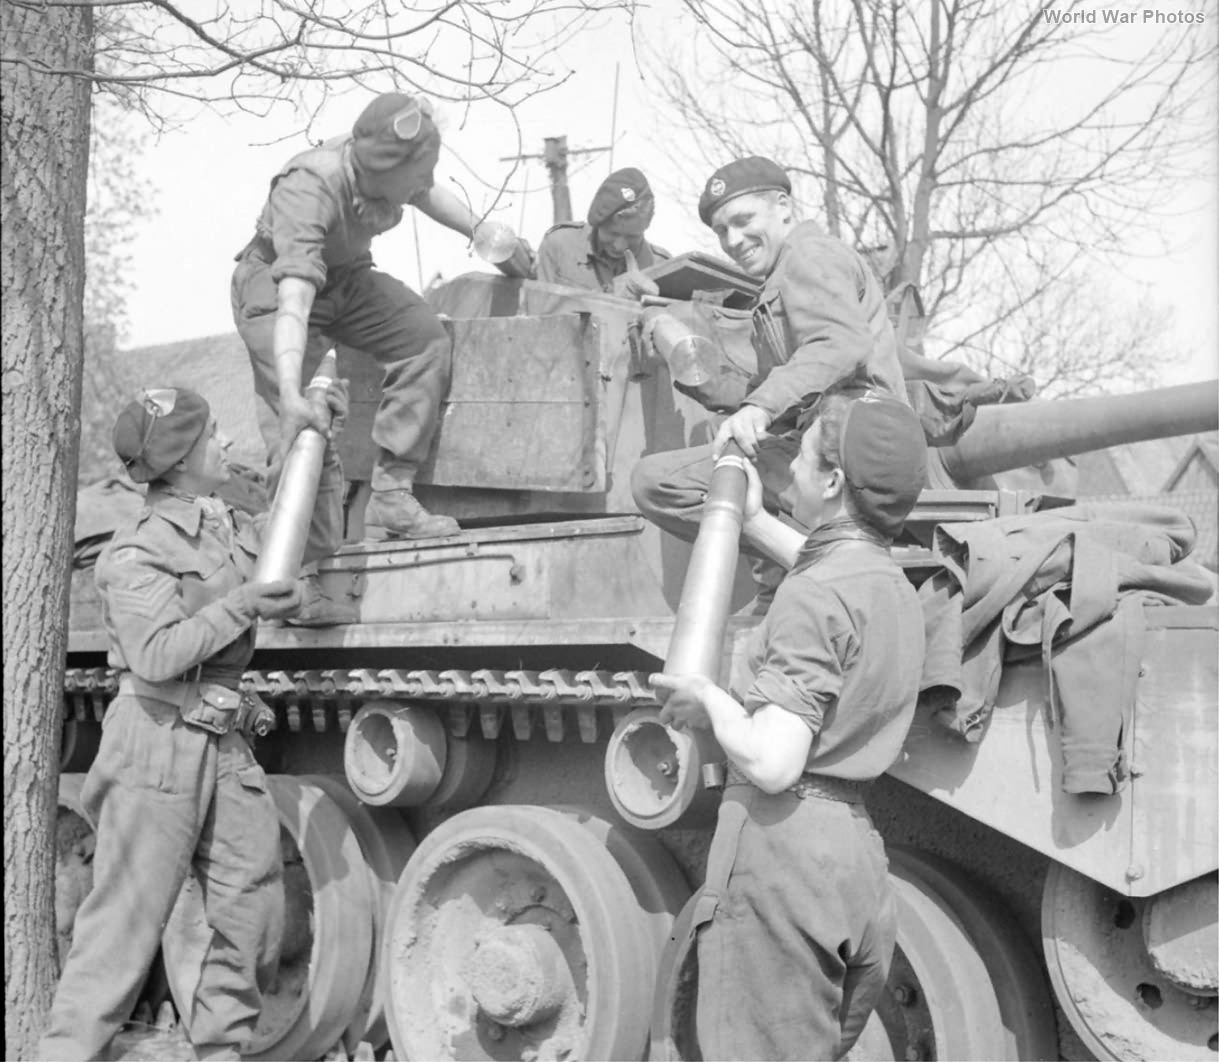 Comet of the 11th Armoured Division 13 April 1945